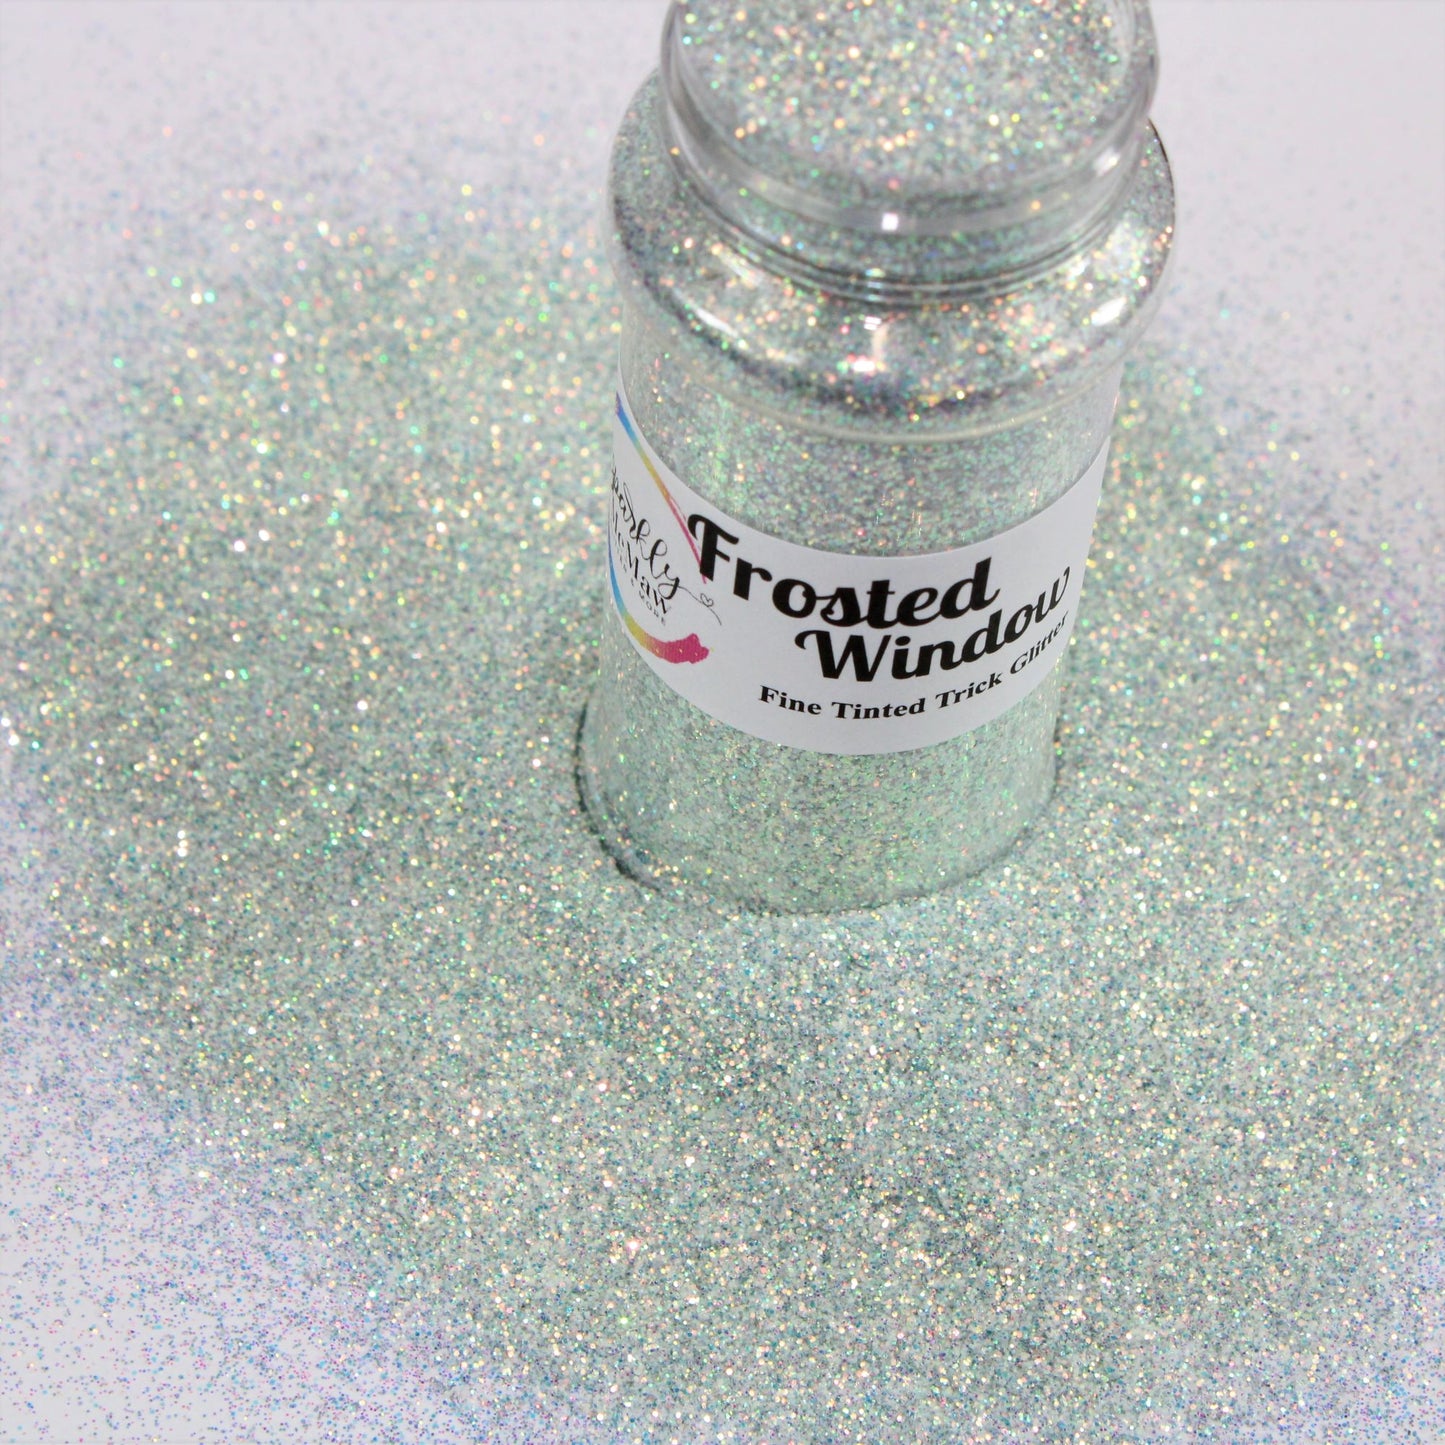 Frosted Window Fine Tinted High Sparkle Trick Glitter